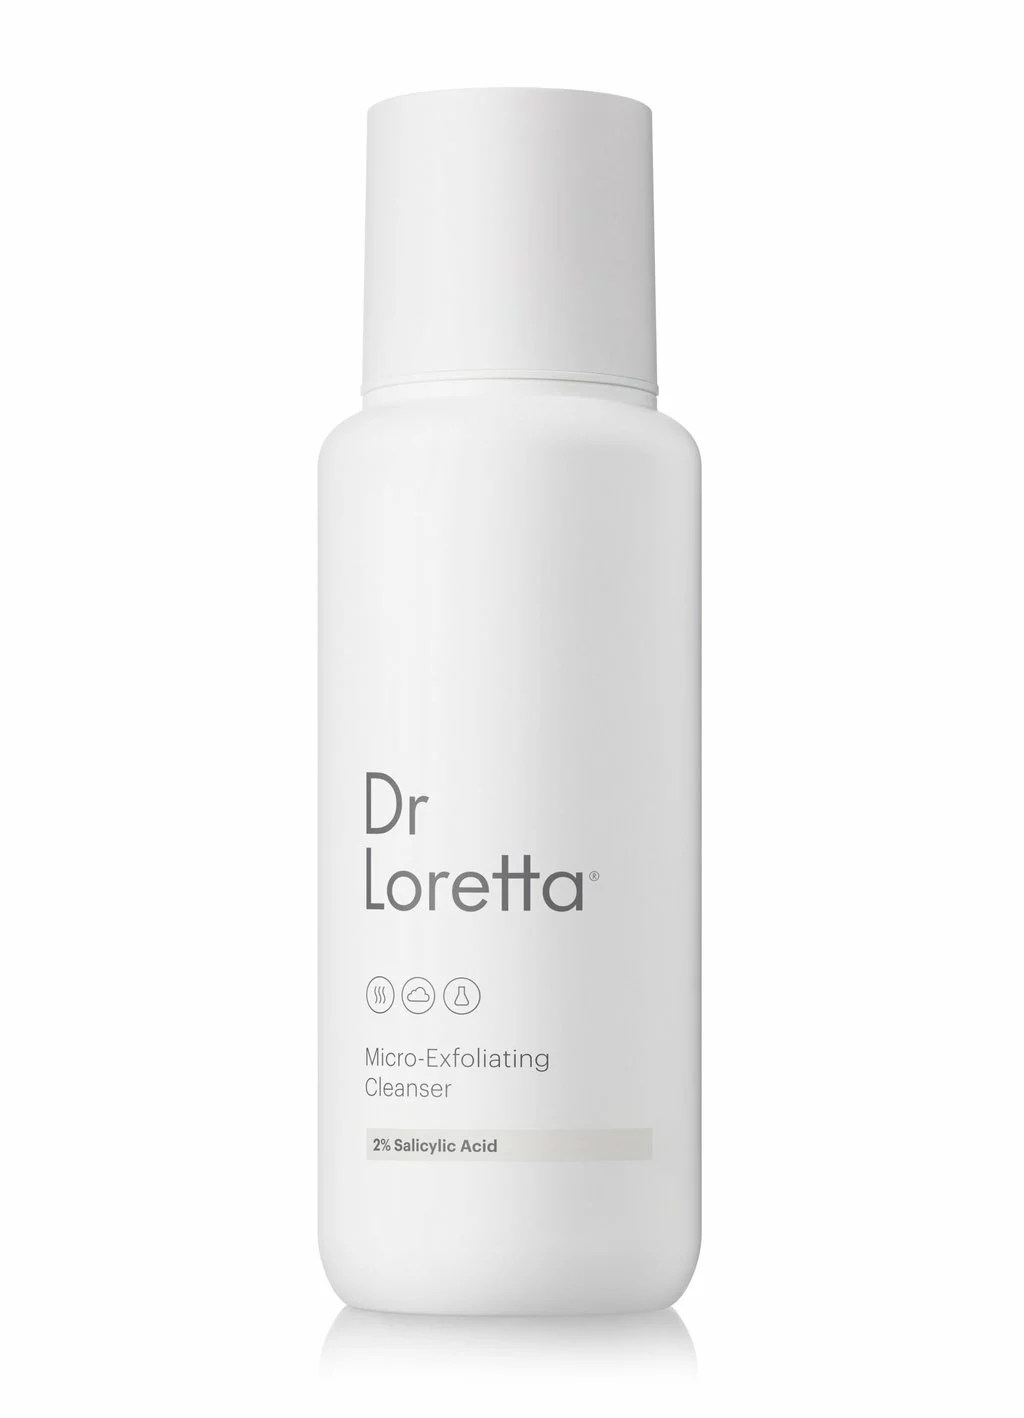 Dr. Loretta Micro Exfoliating Cleanser, effects of hard water on skin and hair